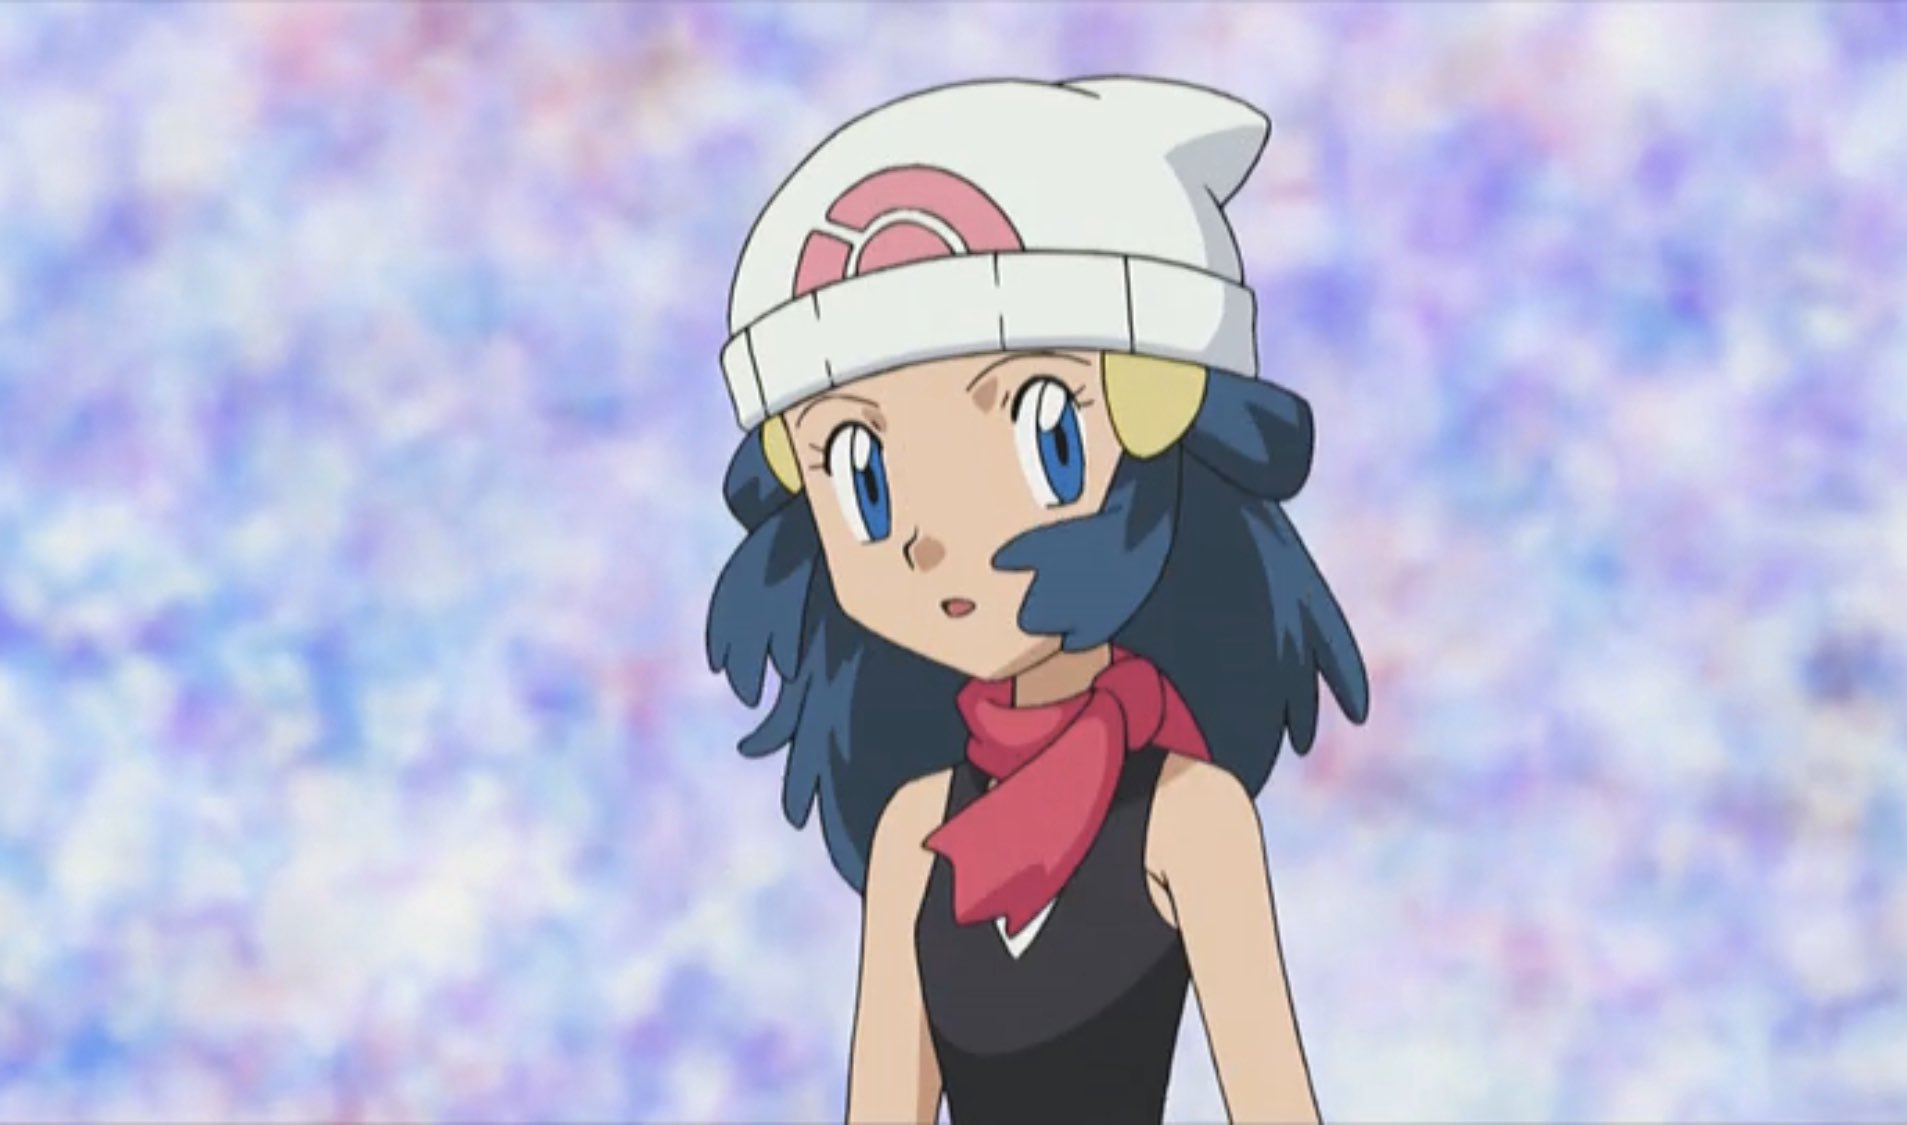 PearlShipping - SatoHika (Ash and Dawn) - DP003 - When Pokémon Worlds  Collide! Ash and Dawn are running through the beginning of the Sinnoh  region to meet! Dawn meets Team Rocket instead